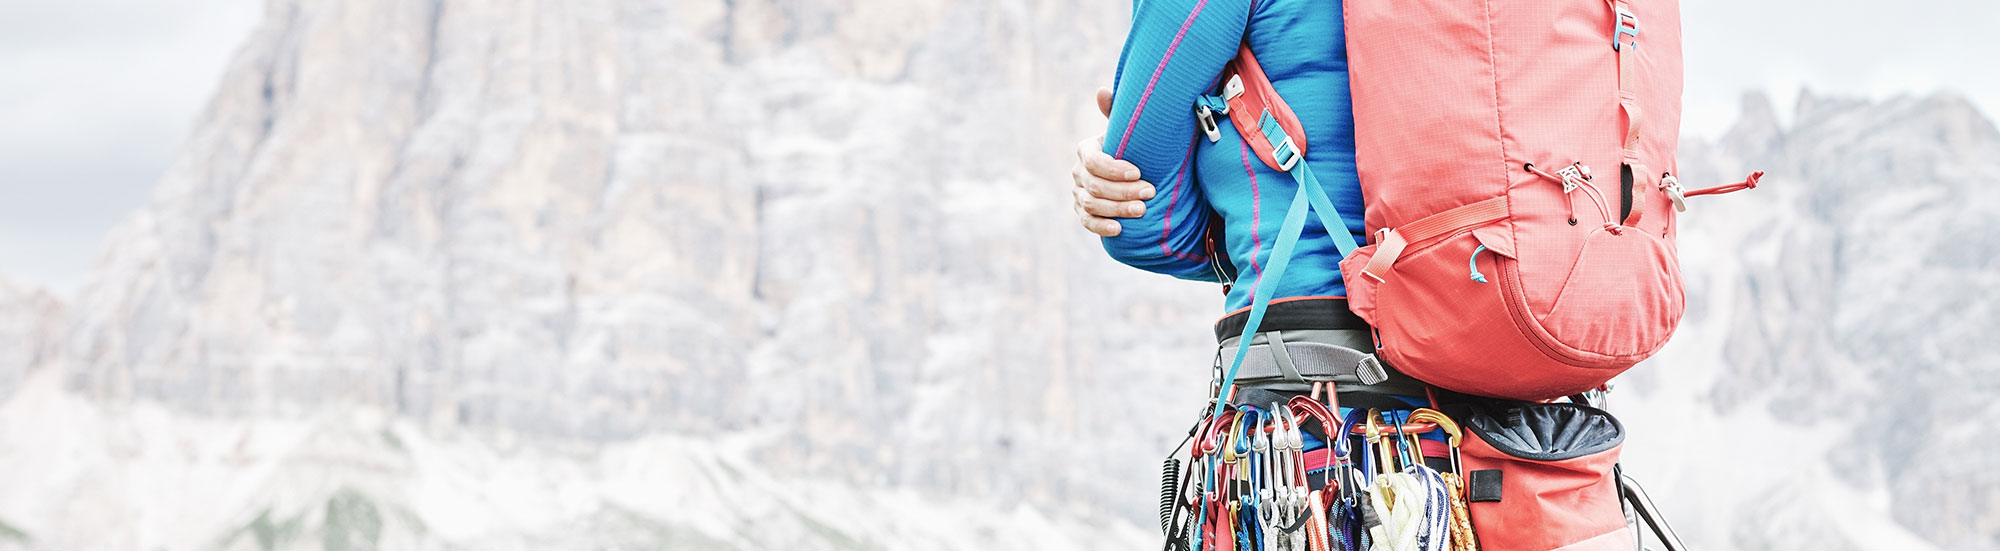 A rock climber in professional gear looking at a mountain